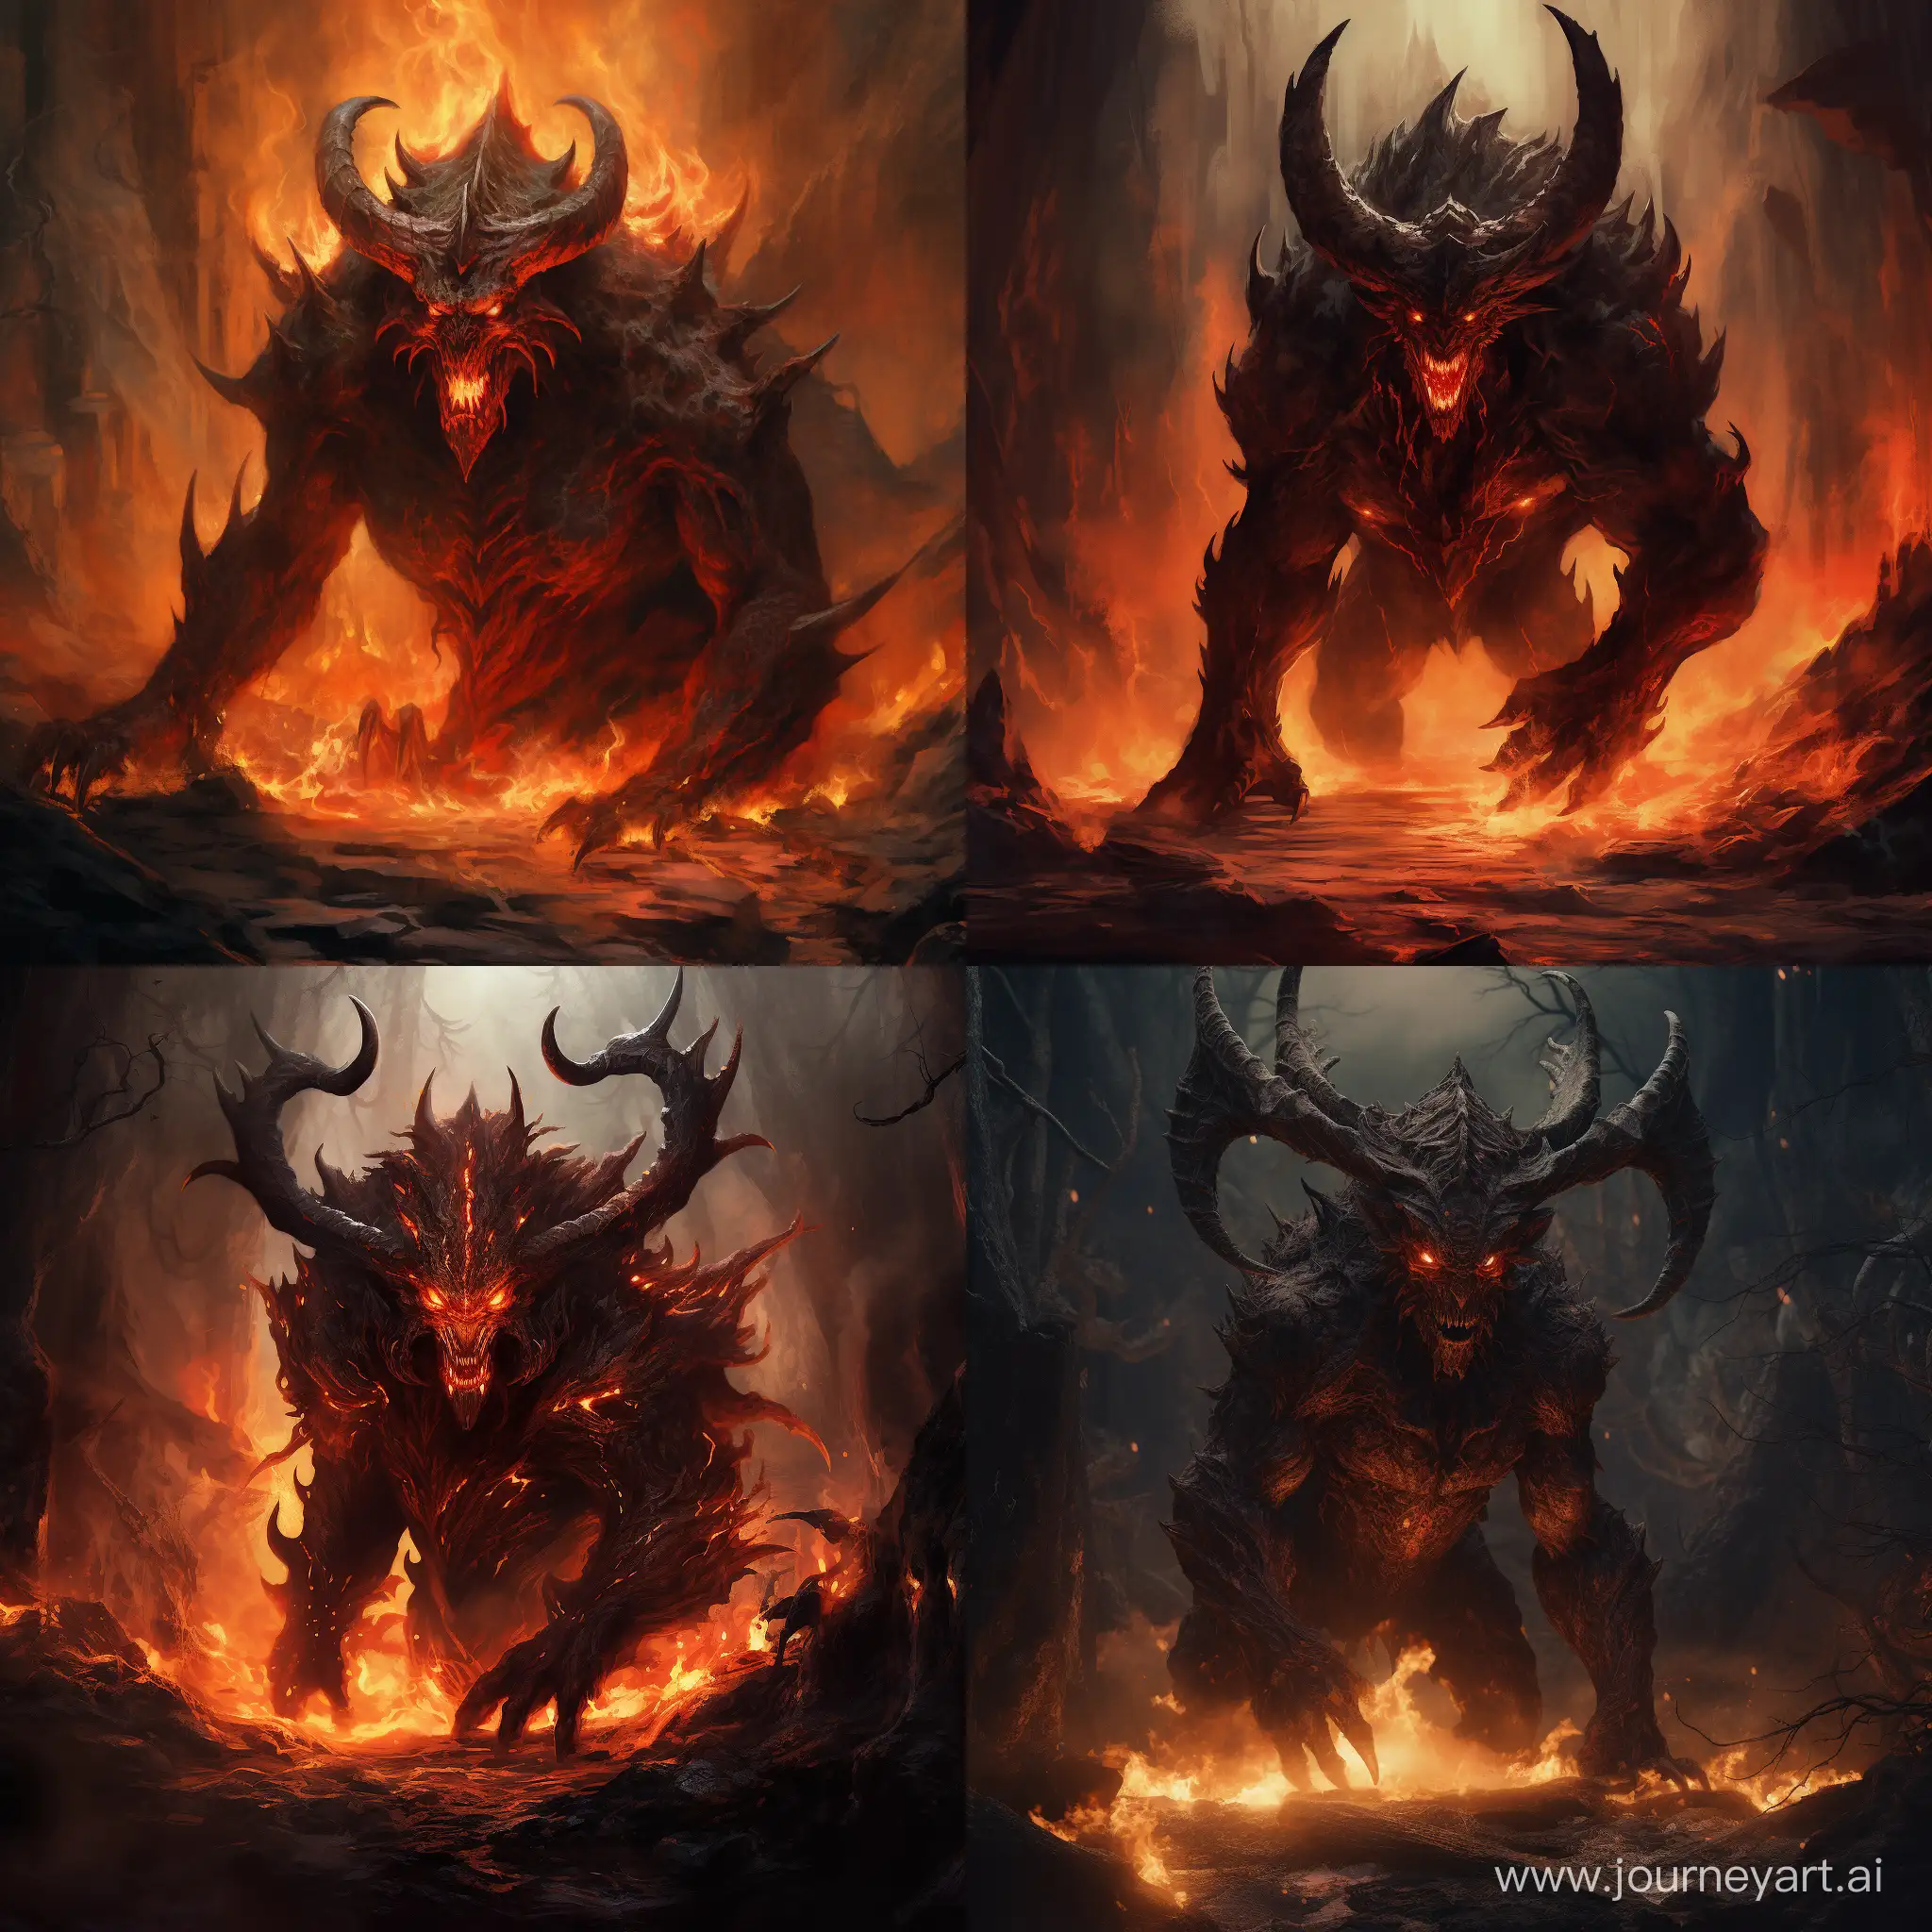 Sinister-Horned-Monster-Amidst-Fiery-Inferno